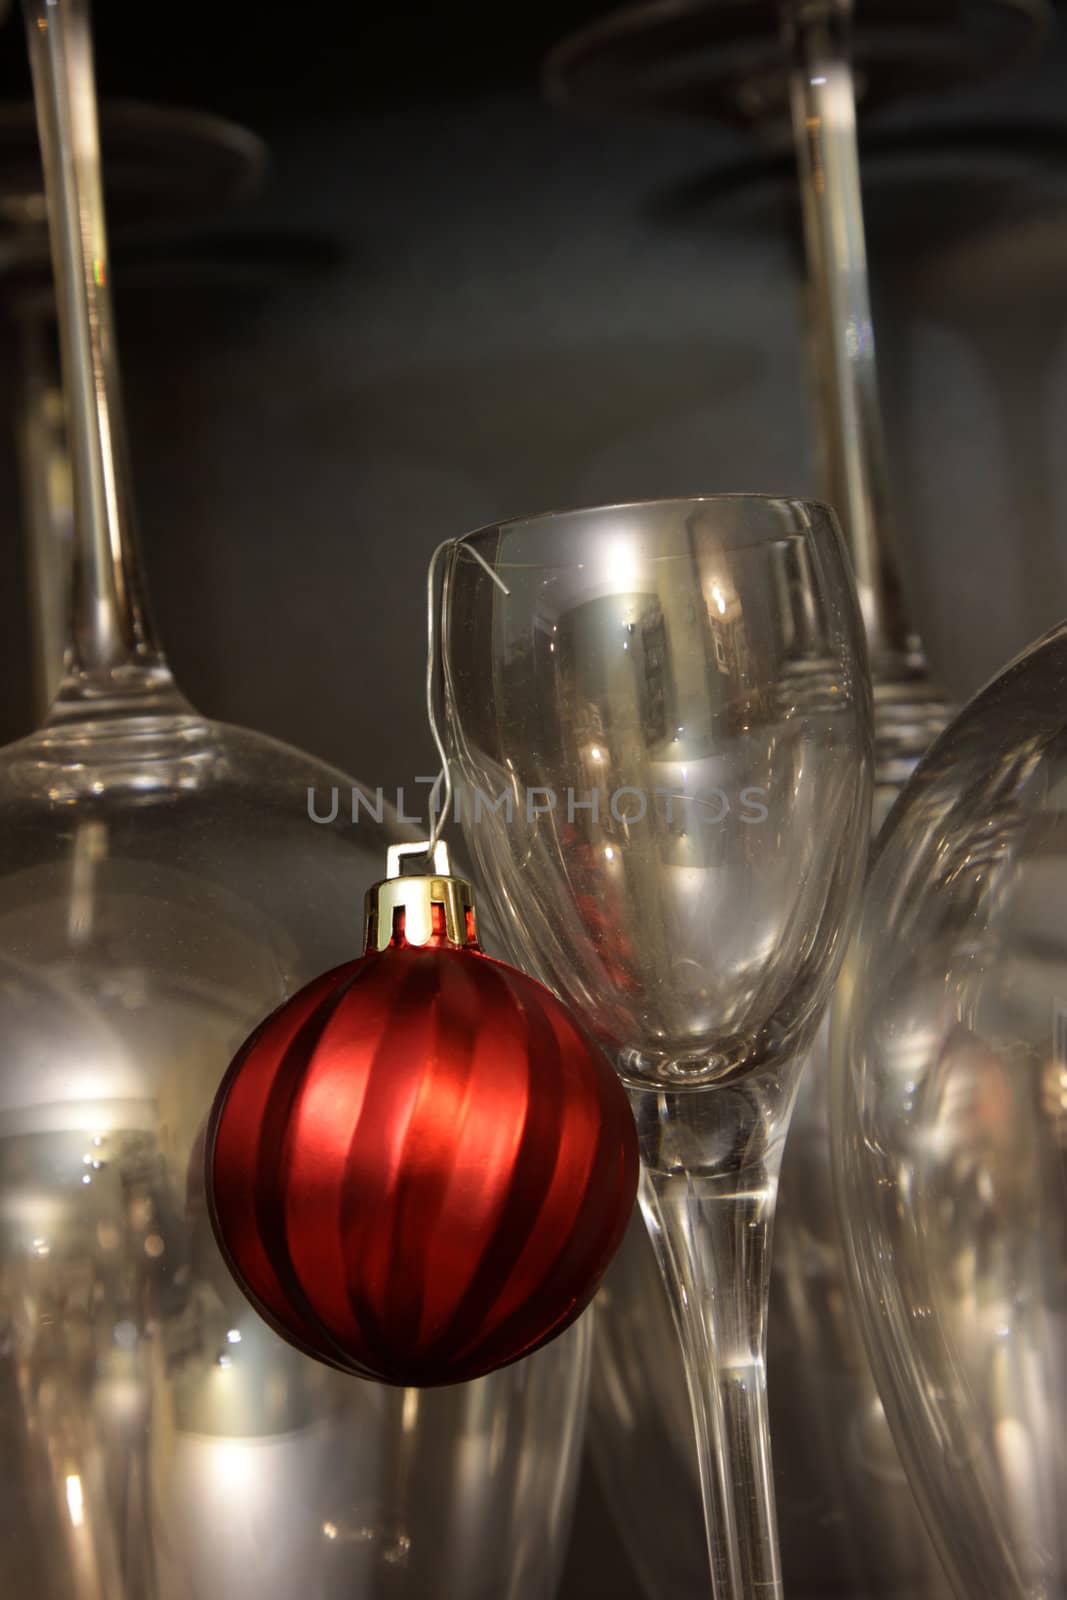 A red Christmas bauble ornament hanging from a dessert glass with wine glasses in the background.
